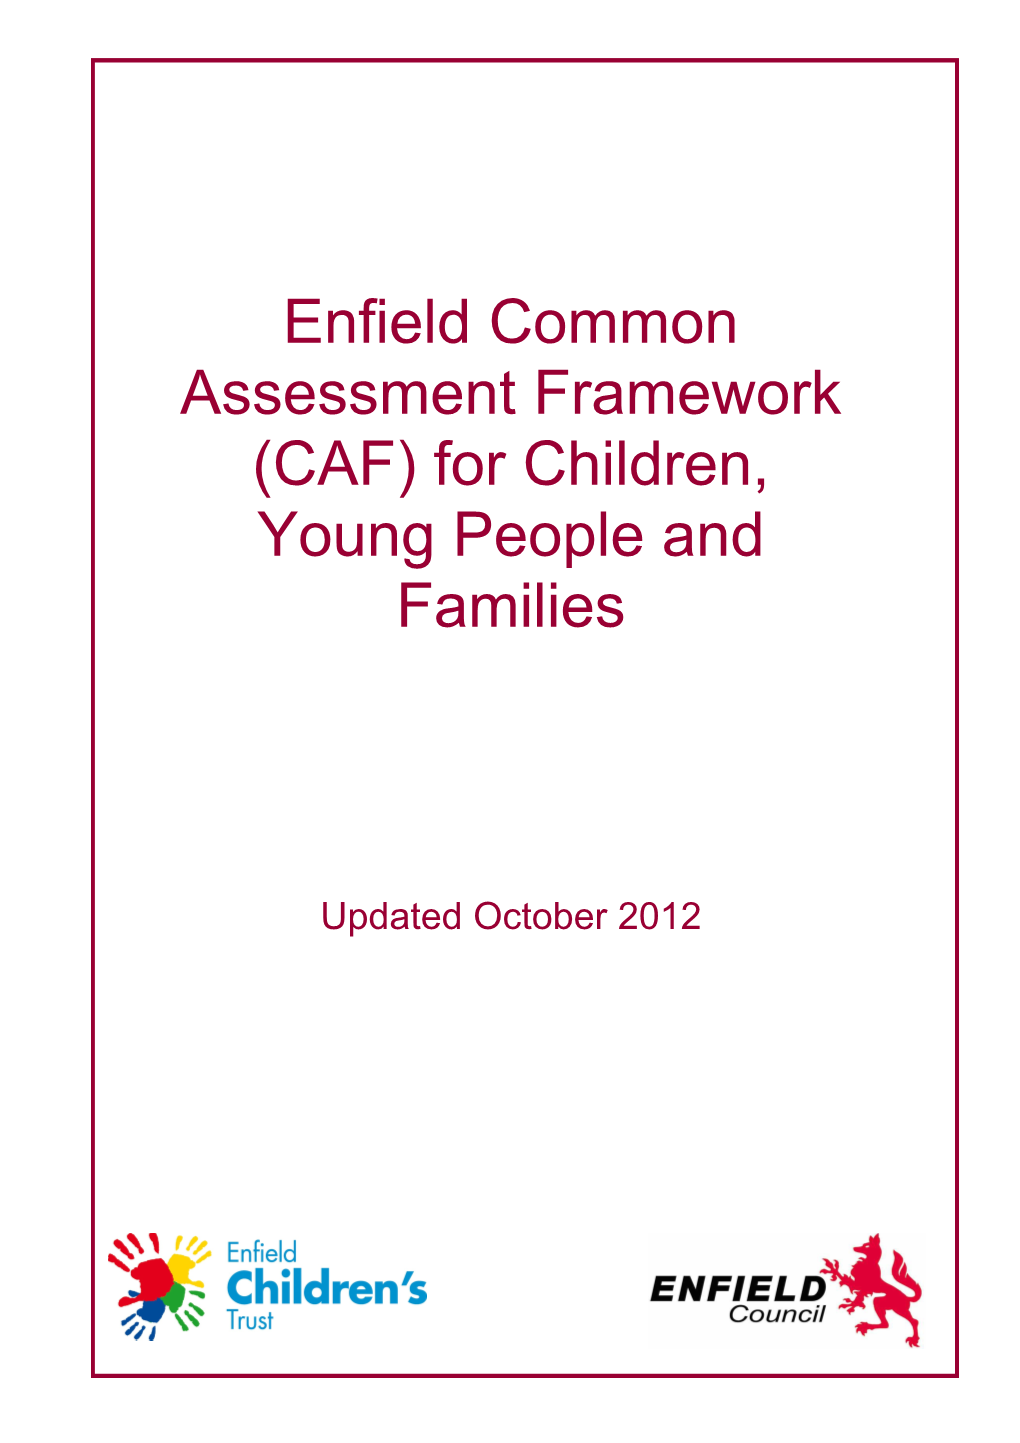 Enfield Common Assessment Framework (CAF) for Children, Young People and Families